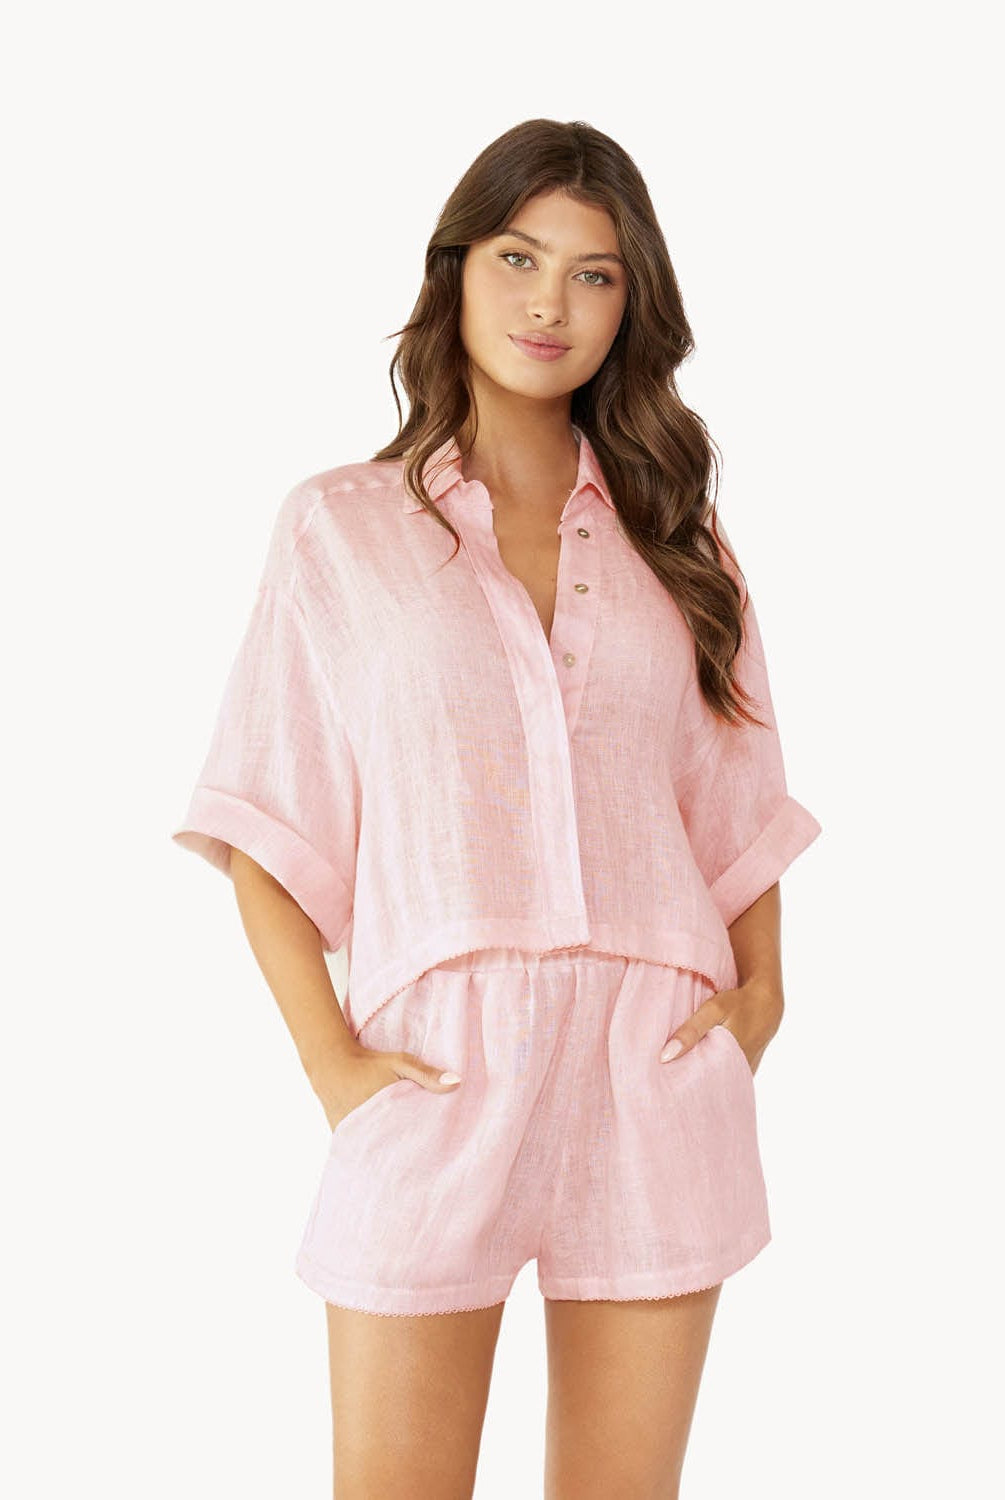 Brunette woman wearing a pink linen button coverup shirt and shorts stands in front of white wall.